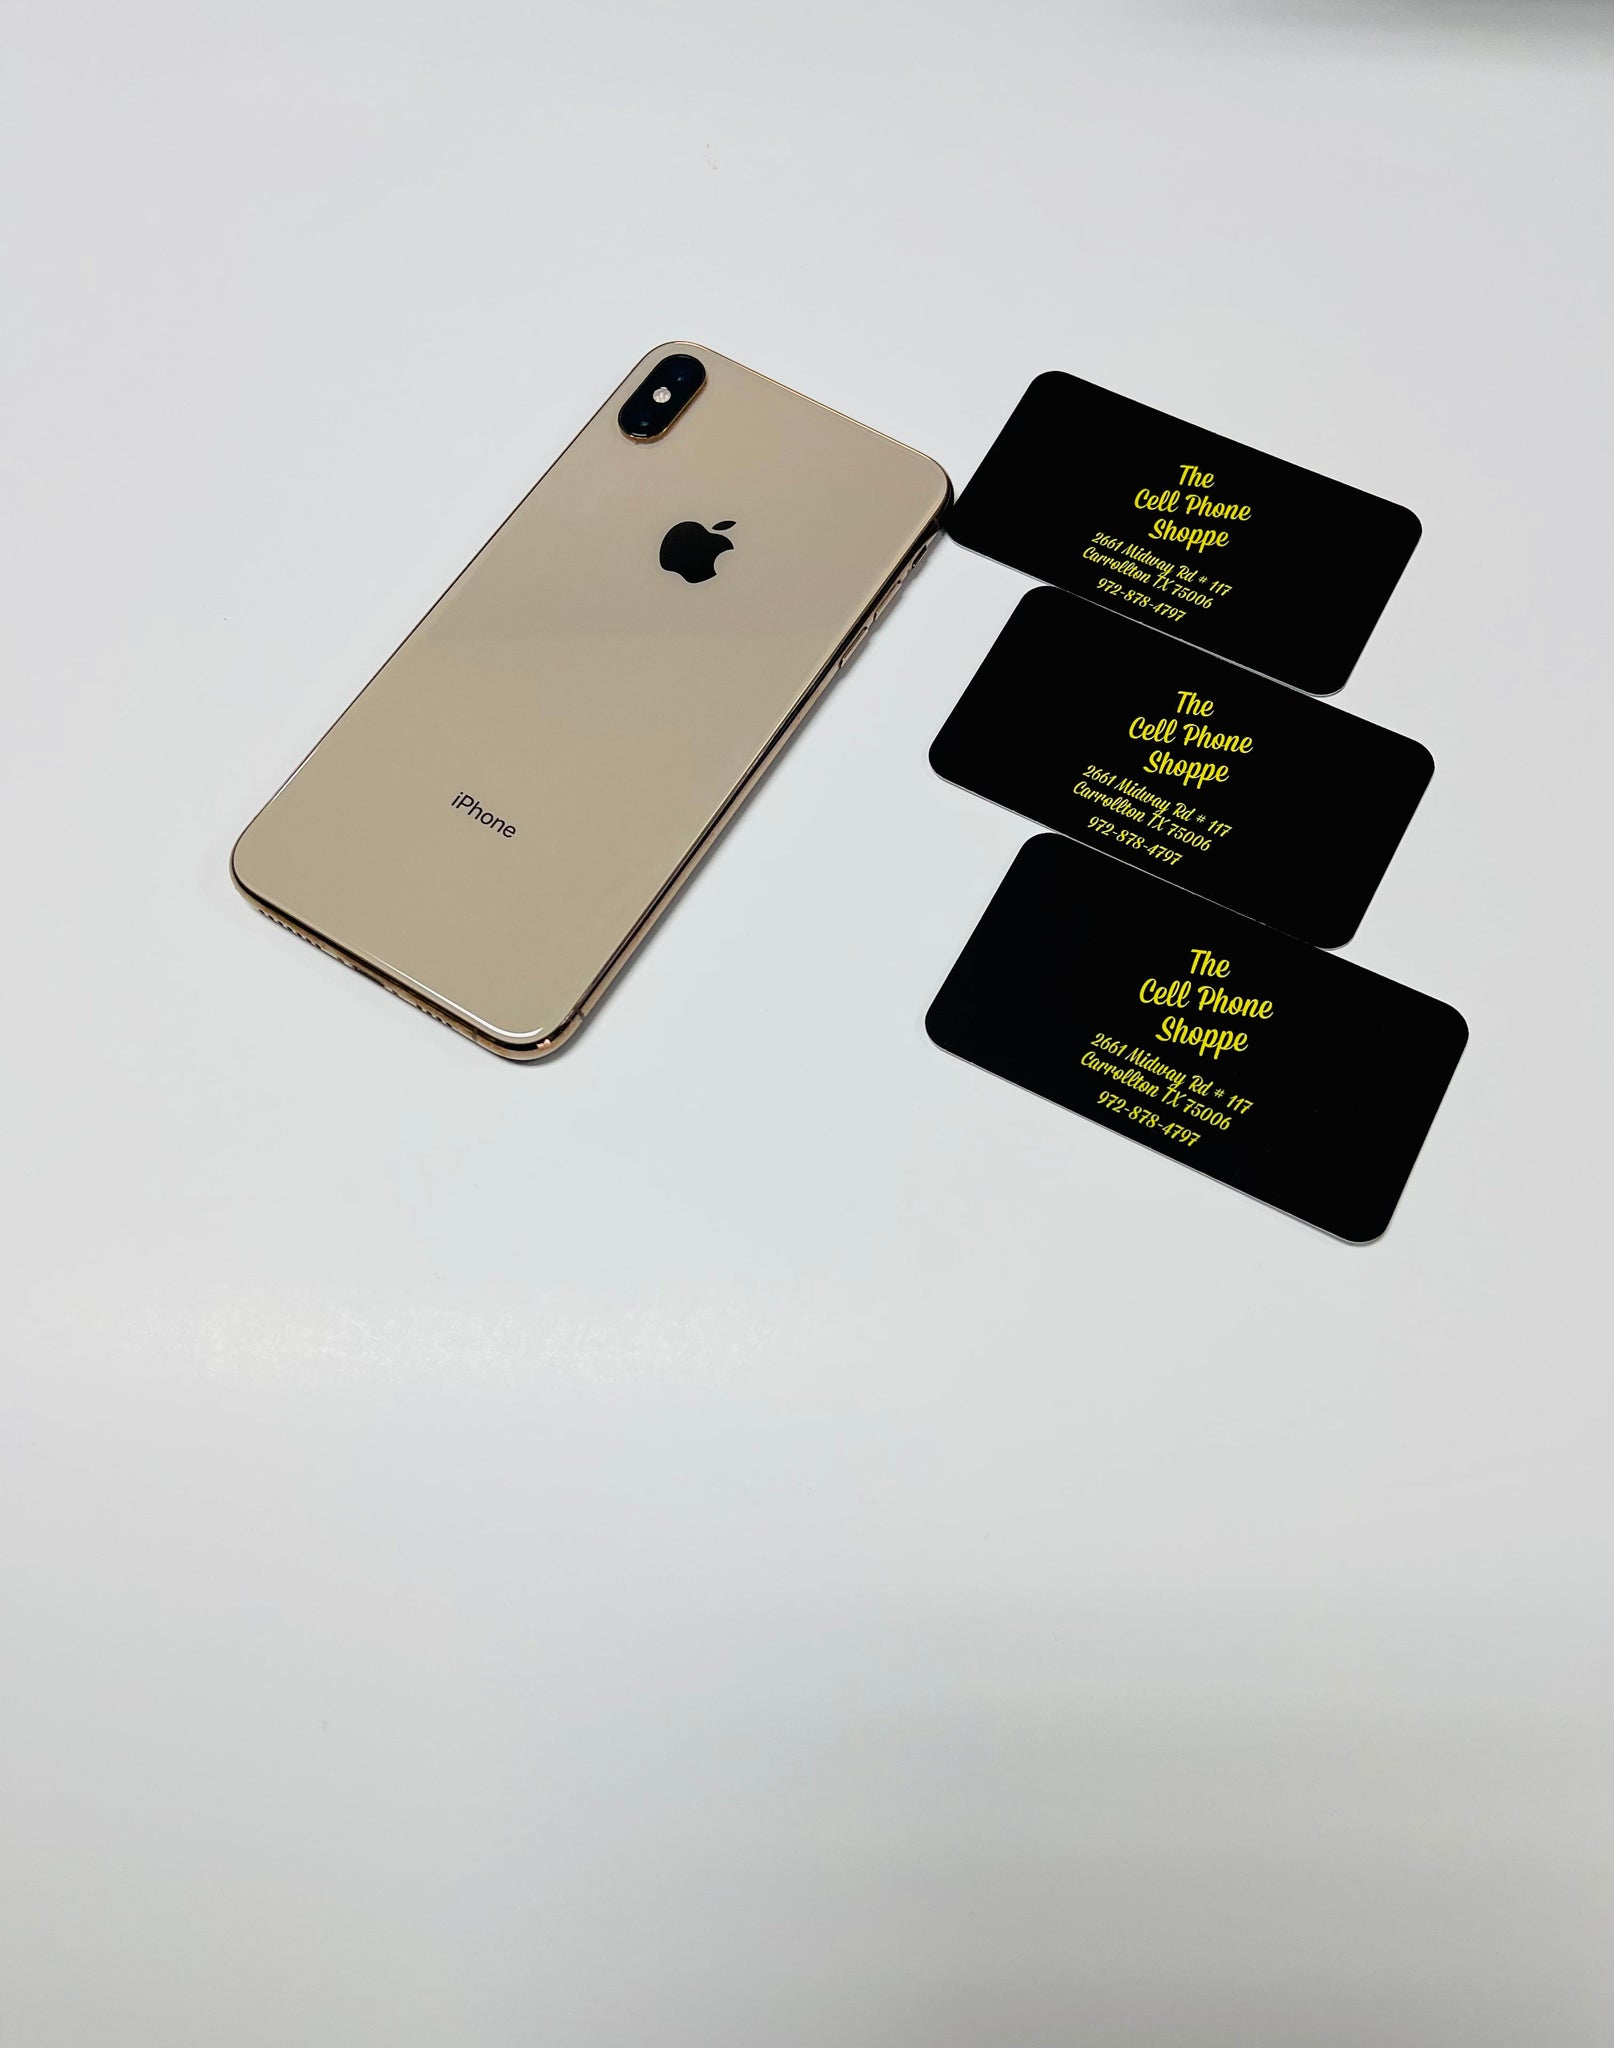 iPhone XS MAX Unlocked Gold 256GB (Finance for $50 down) – The